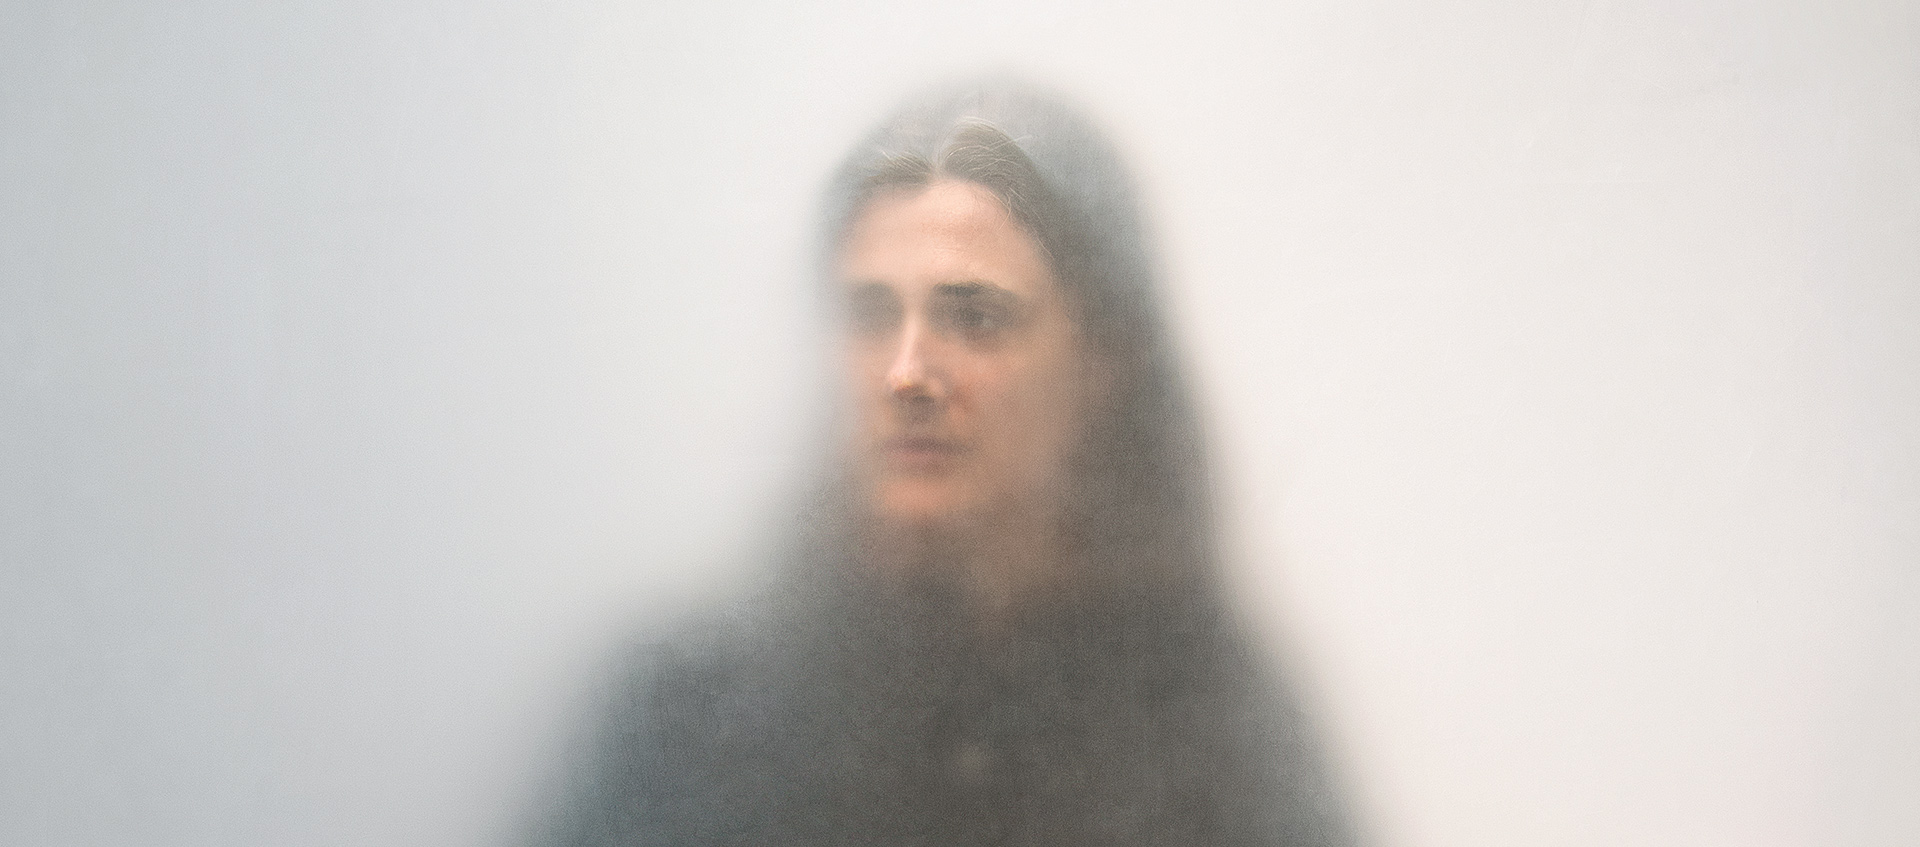 Photo portrait of dance artist Faye Driscoll as seen behind a diffusing scrim against a neutral gray background; image taken as part of artist Ann Hamilton's "One Everyone" project